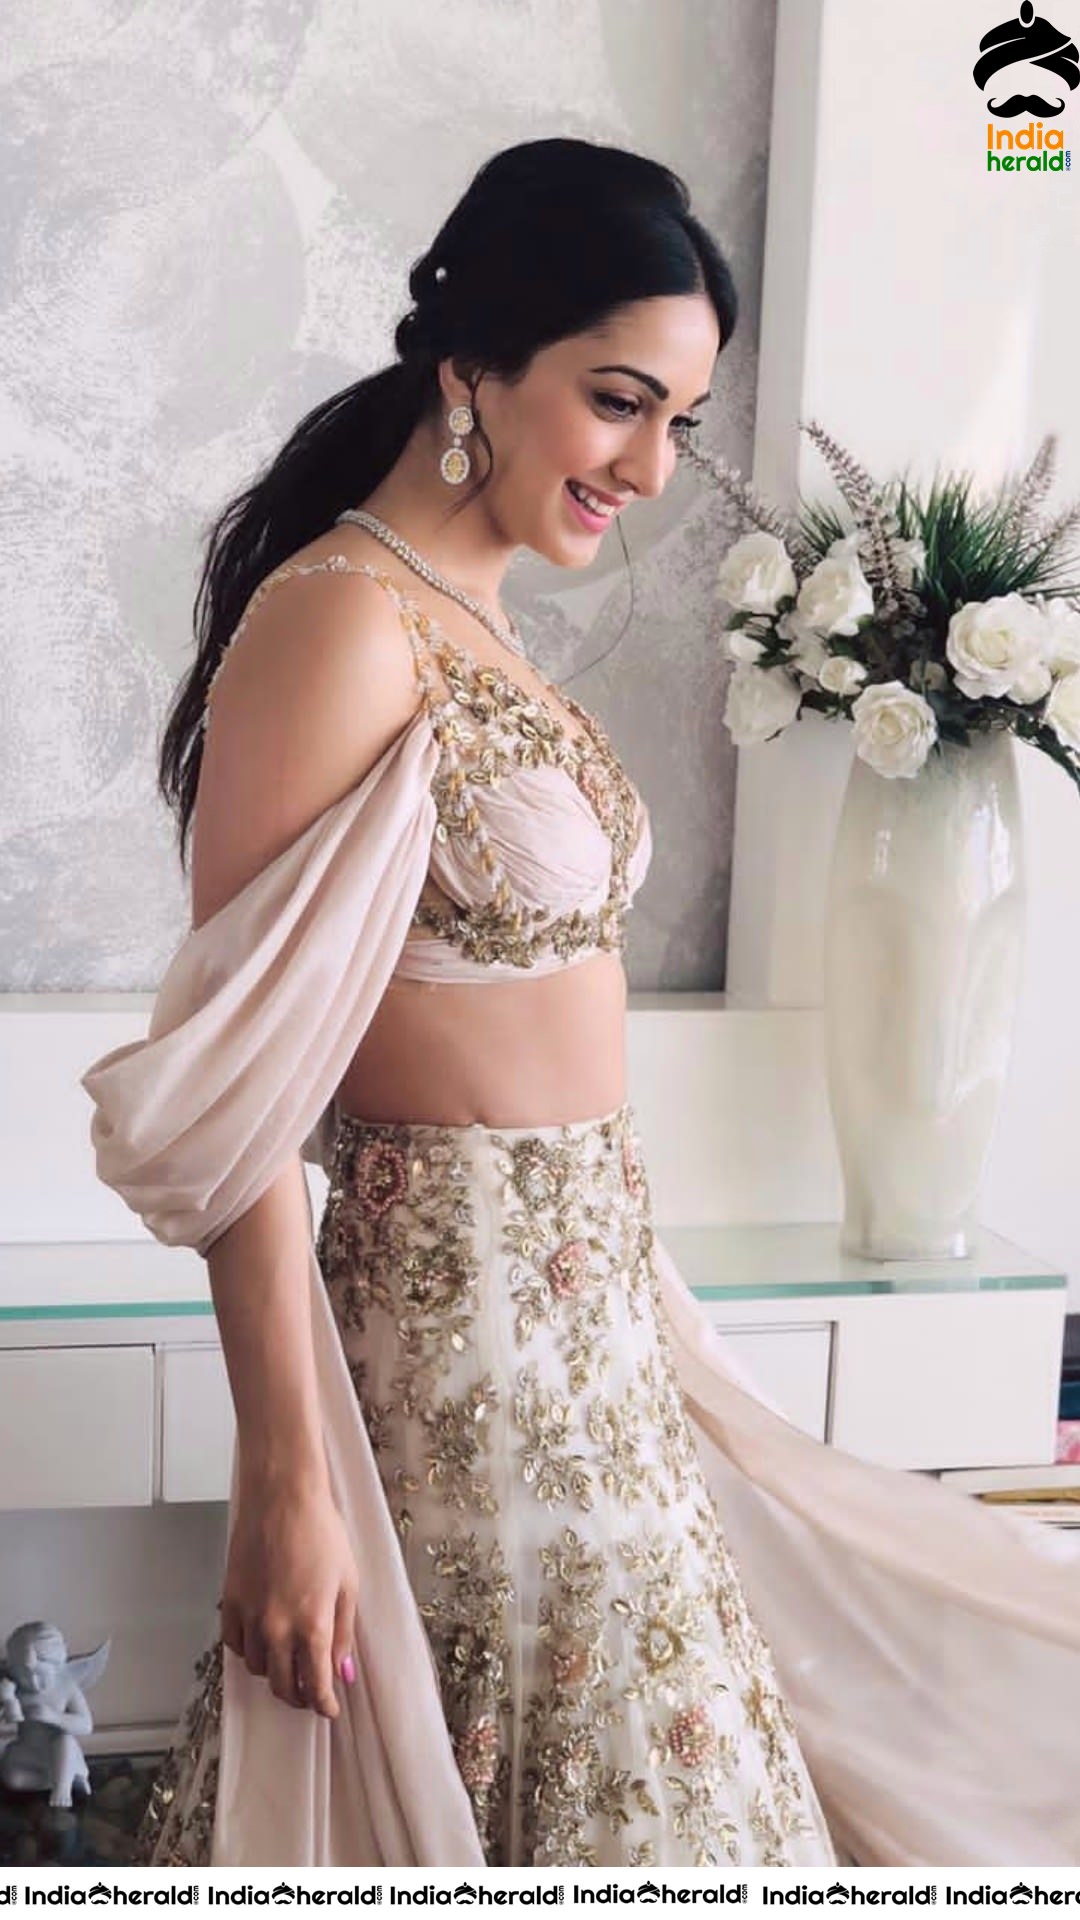 Kiara Advani Shows Her Fleshy Belly And Sexy Assets At A Wedding Set 2